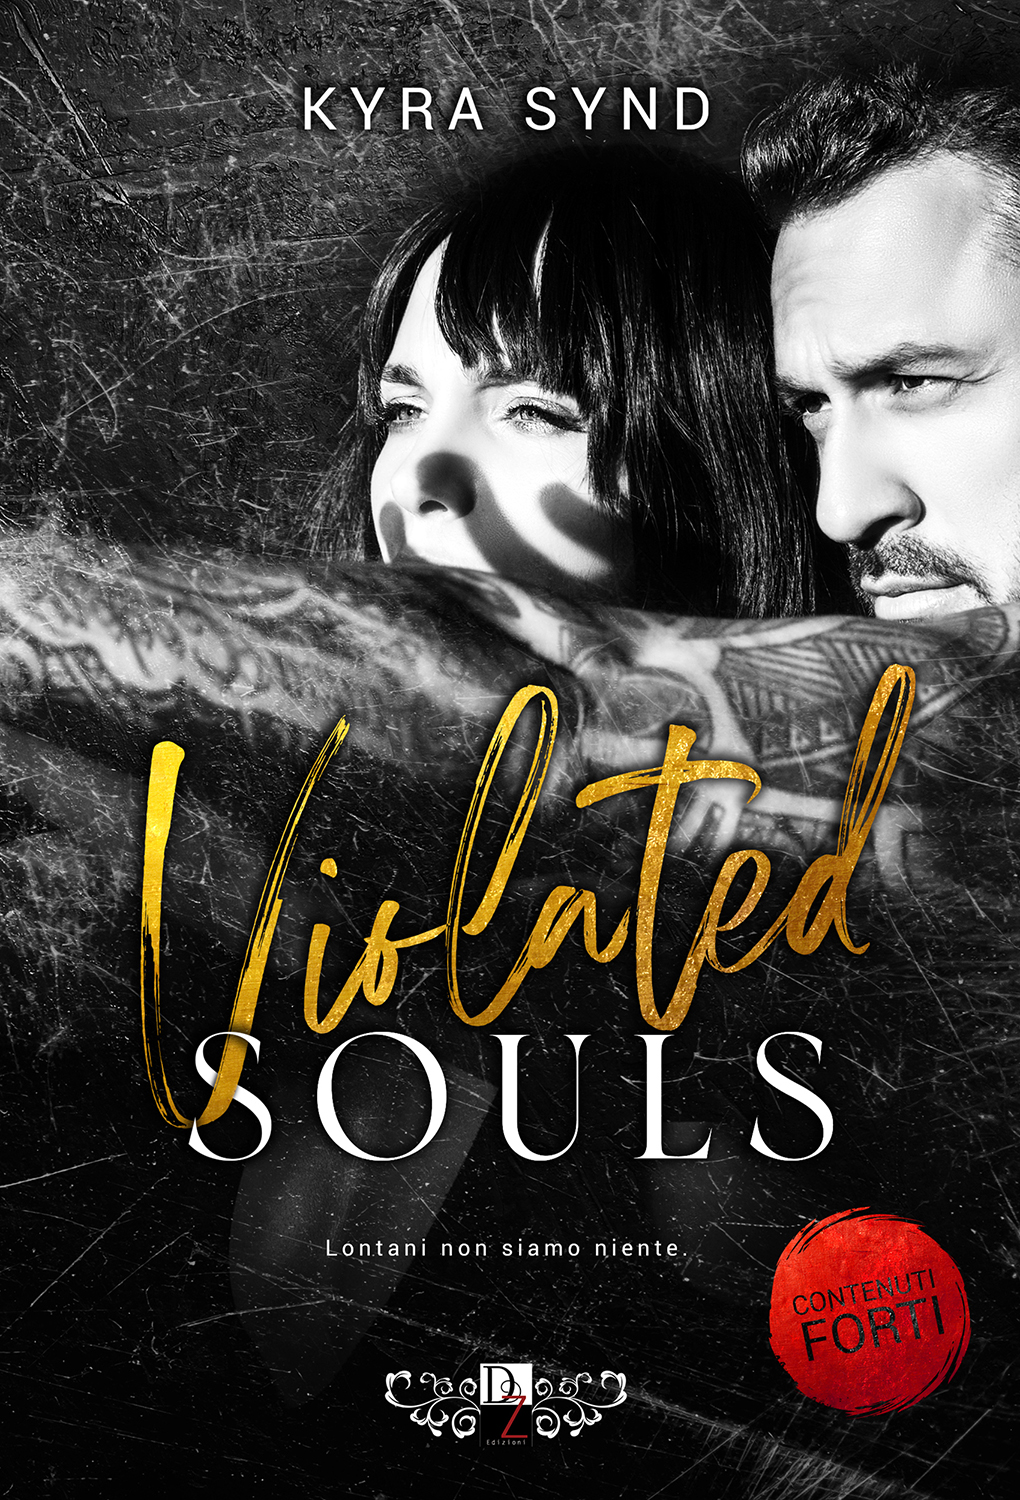 Review Tour “Violated souls (Criminal scars Vol. 1) di Kyra Synd